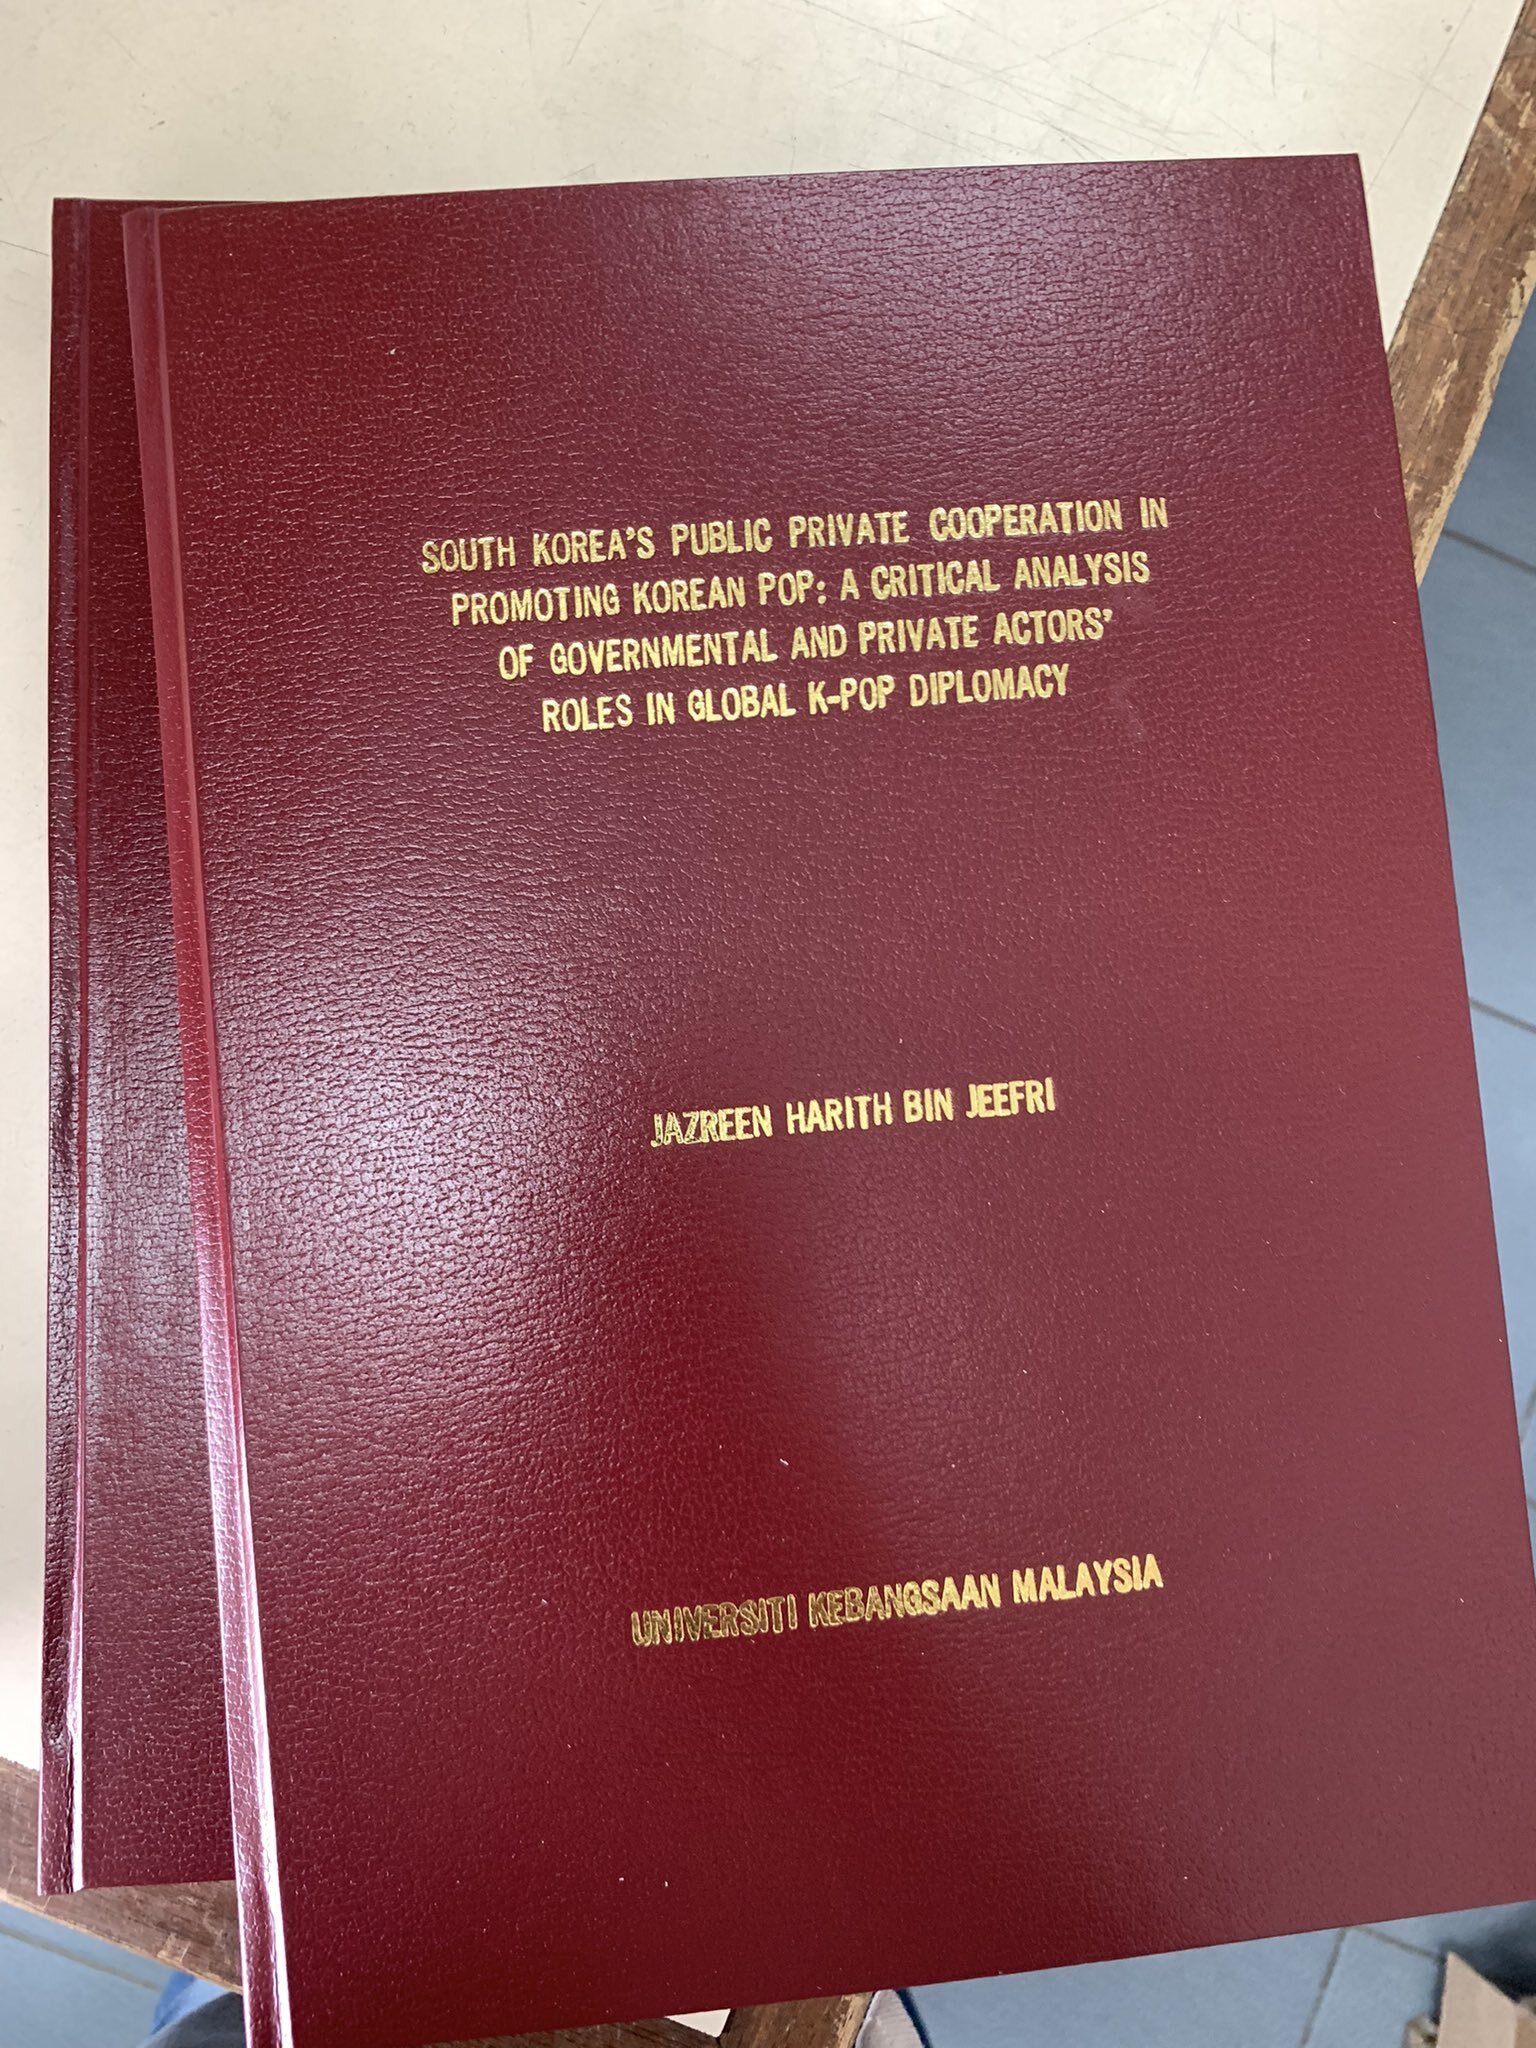 Thesis on k-pop band exo